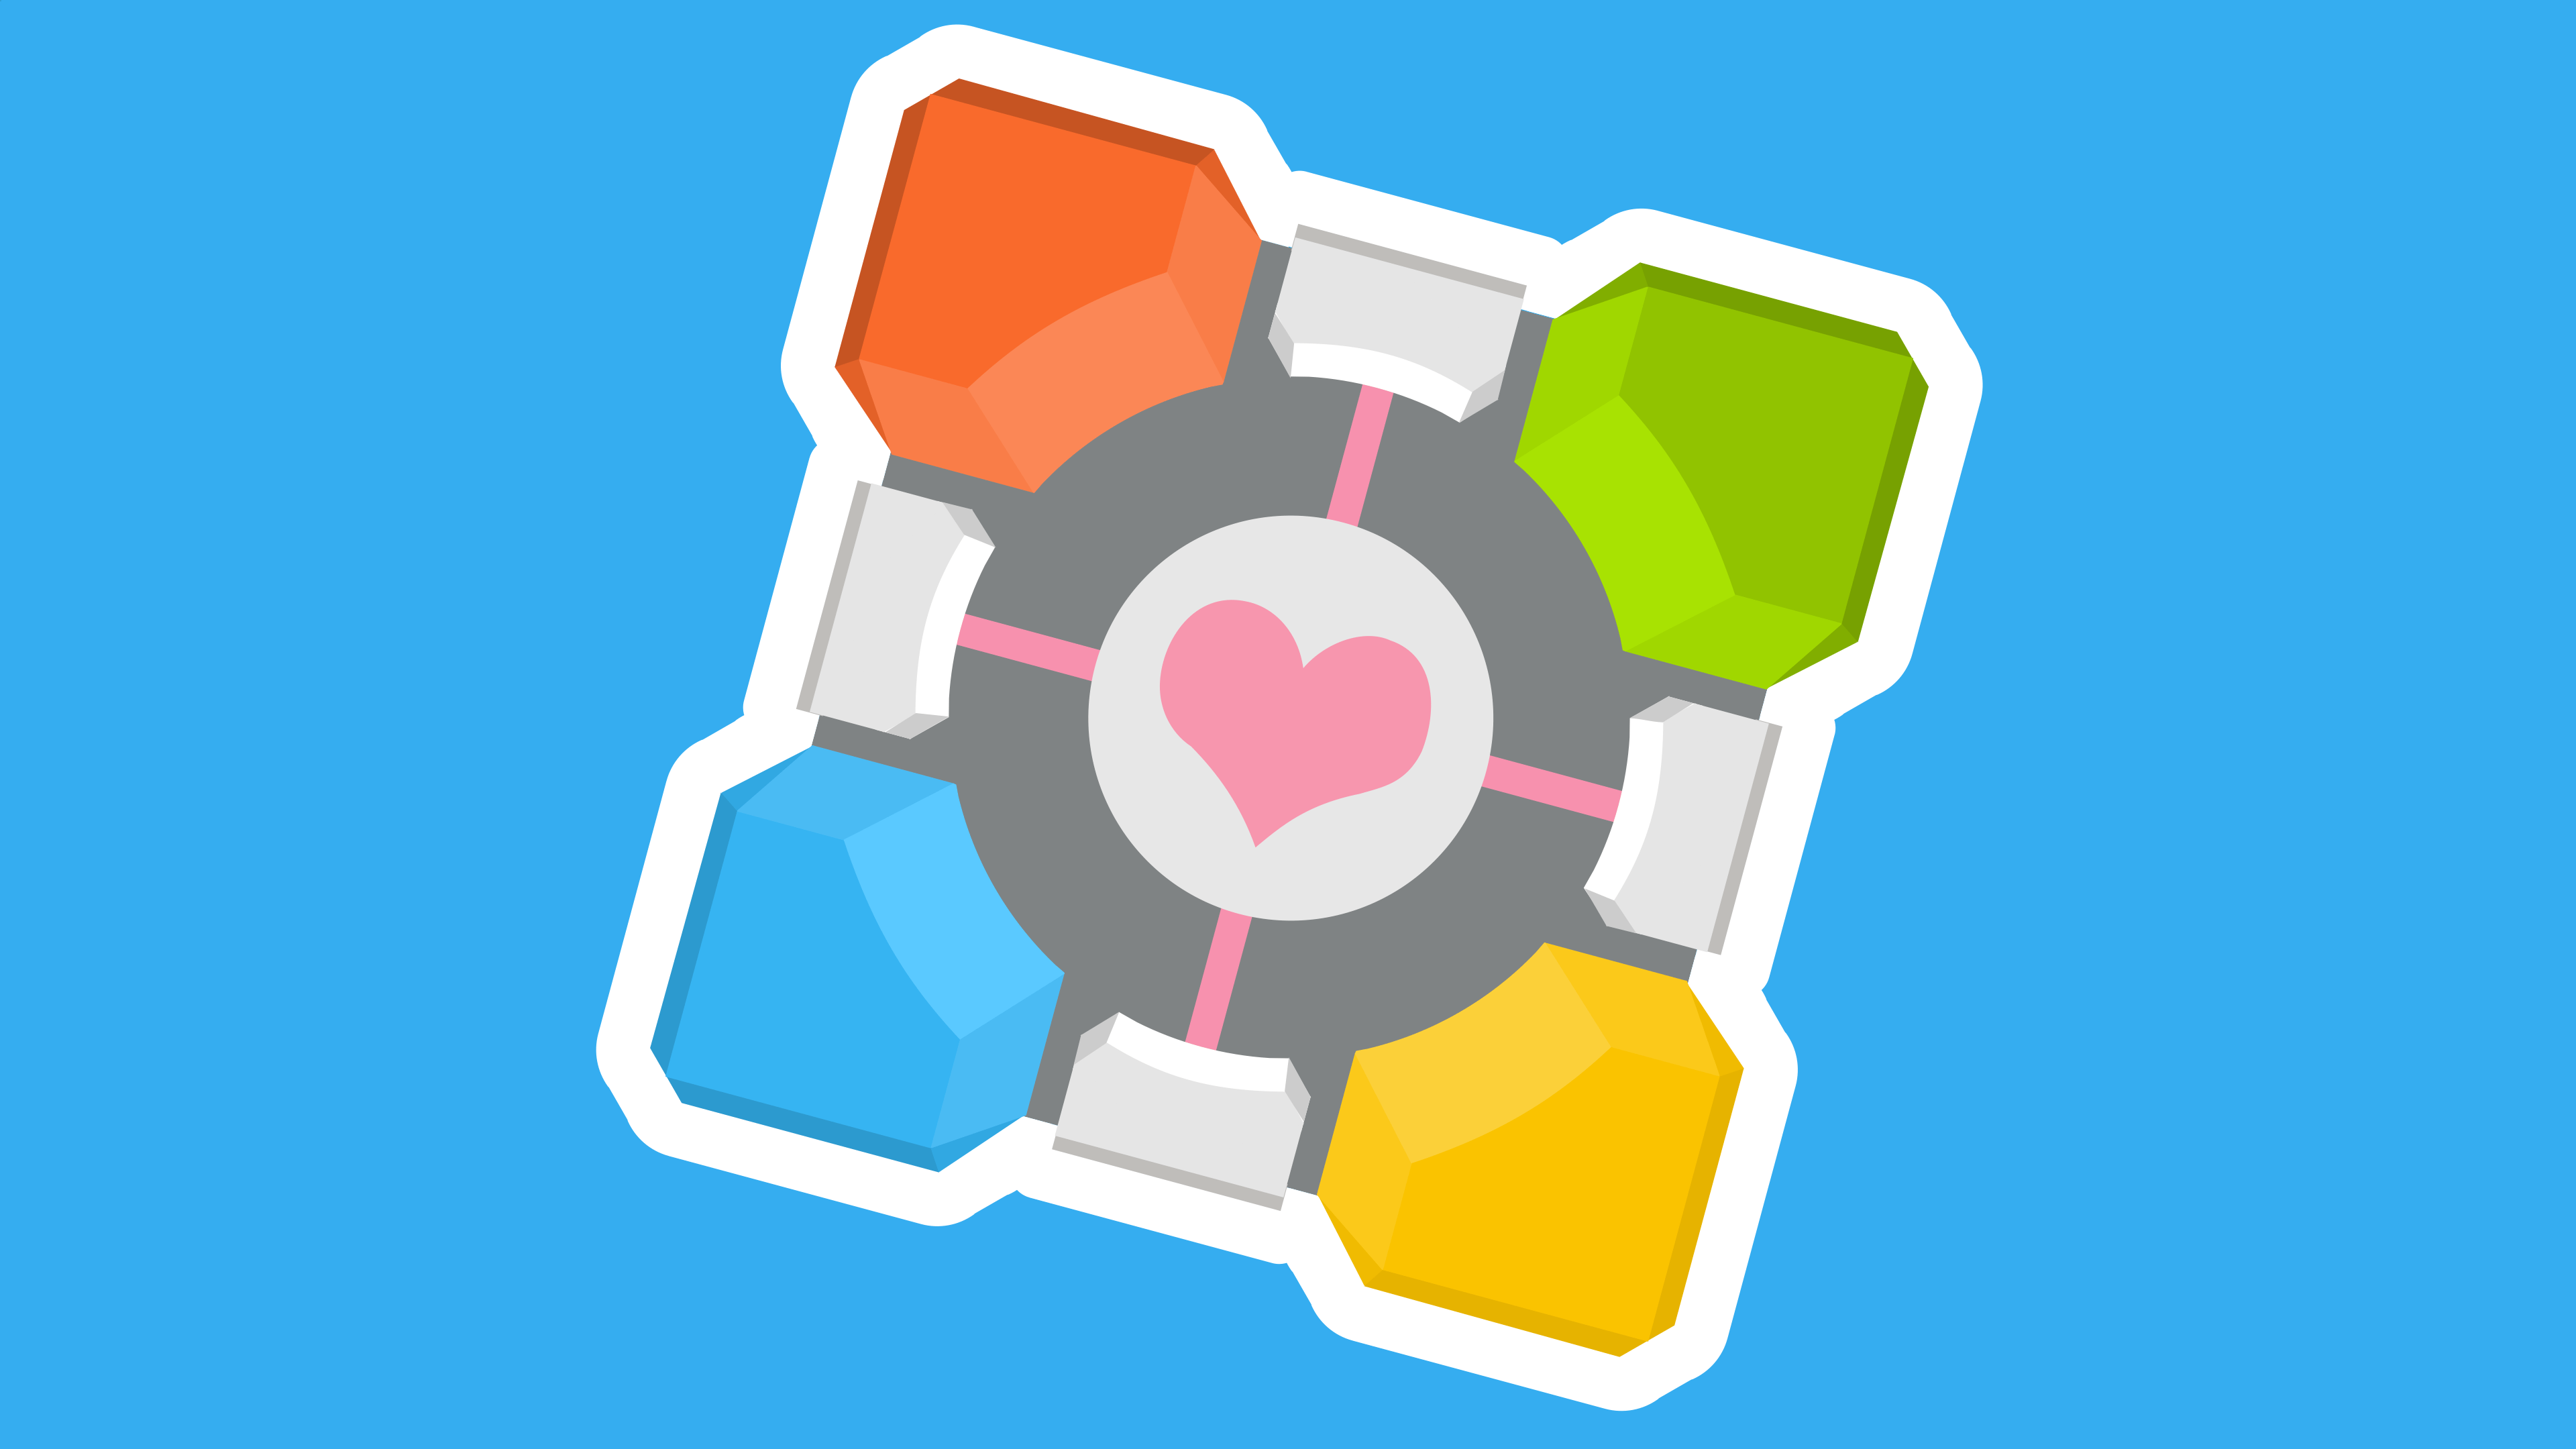 A weighted companion cube in Windows colours